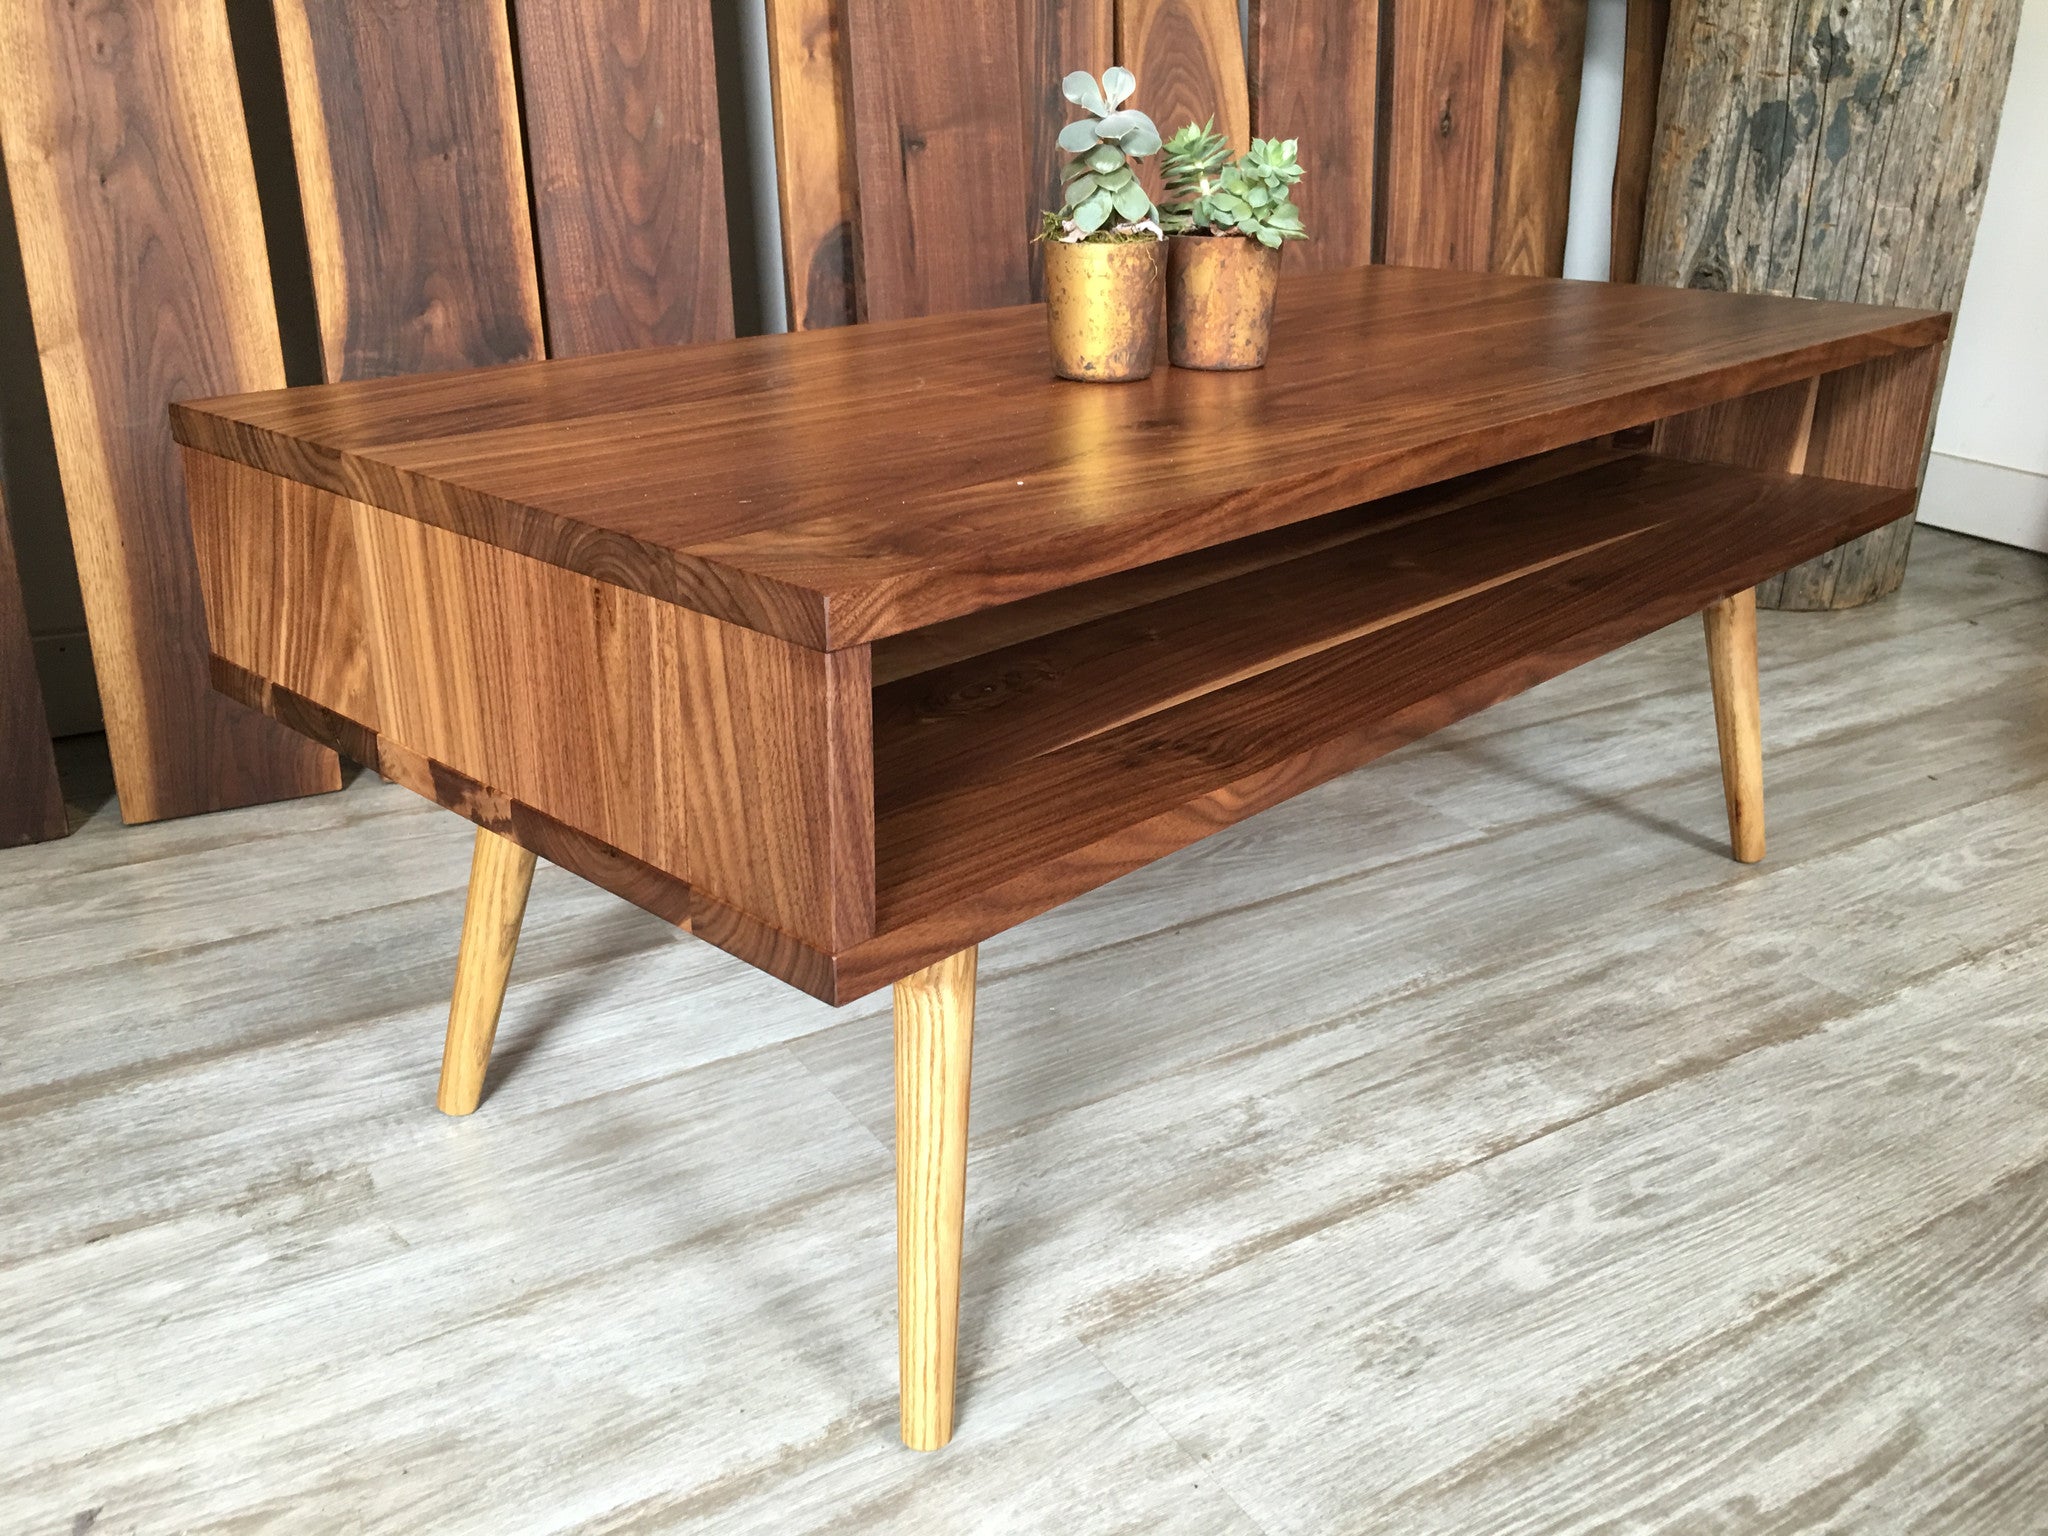 Classic Mid Century Modern Coffee Table - JeremiahCollection - 1